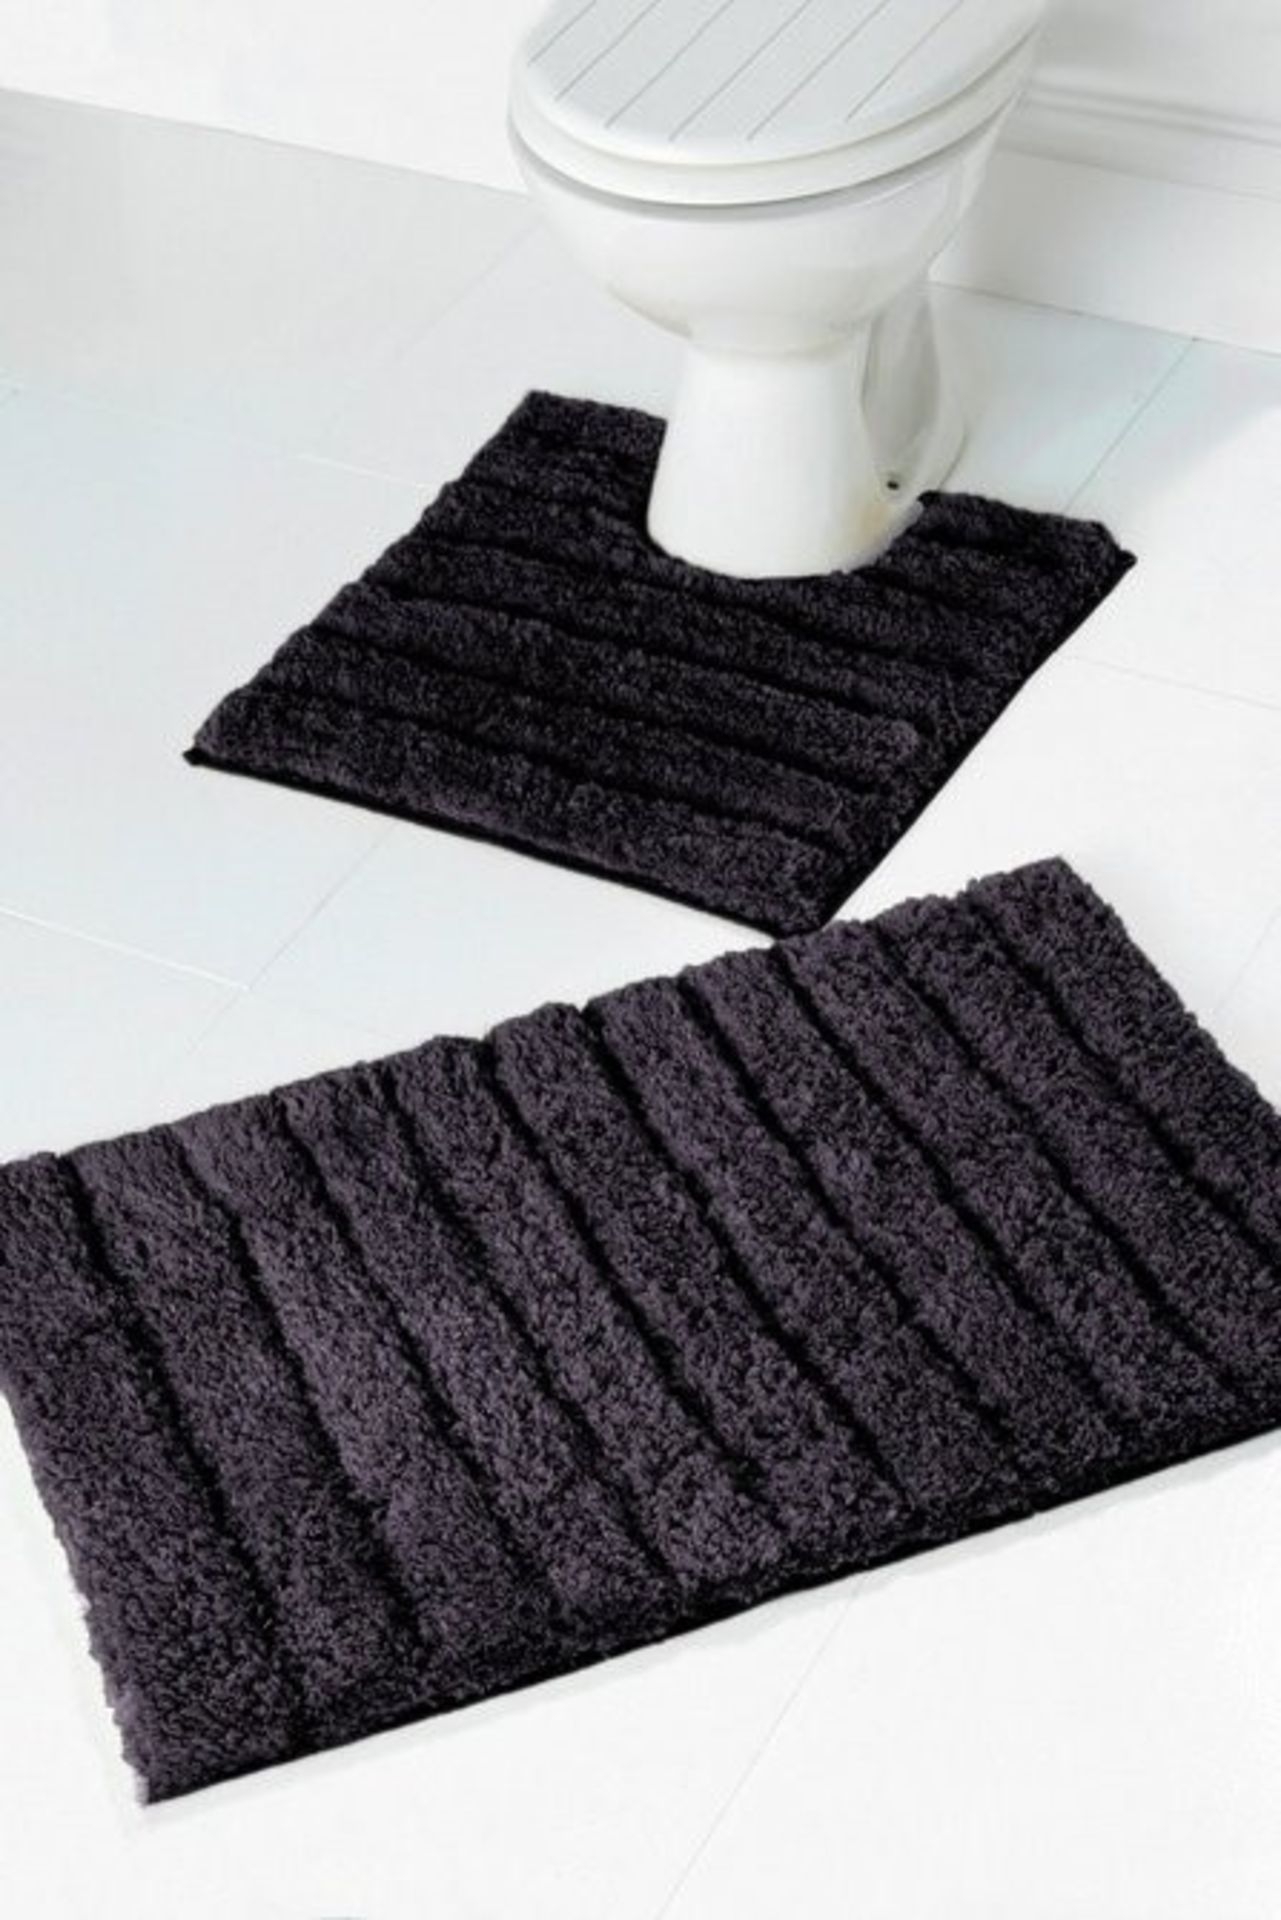 1 BAGGED SUPERSOFT SPARKLING BATH MAT SET IN CHARCOAL (PUBLIC VIEWING AVAILABLE) - Image 2 of 2